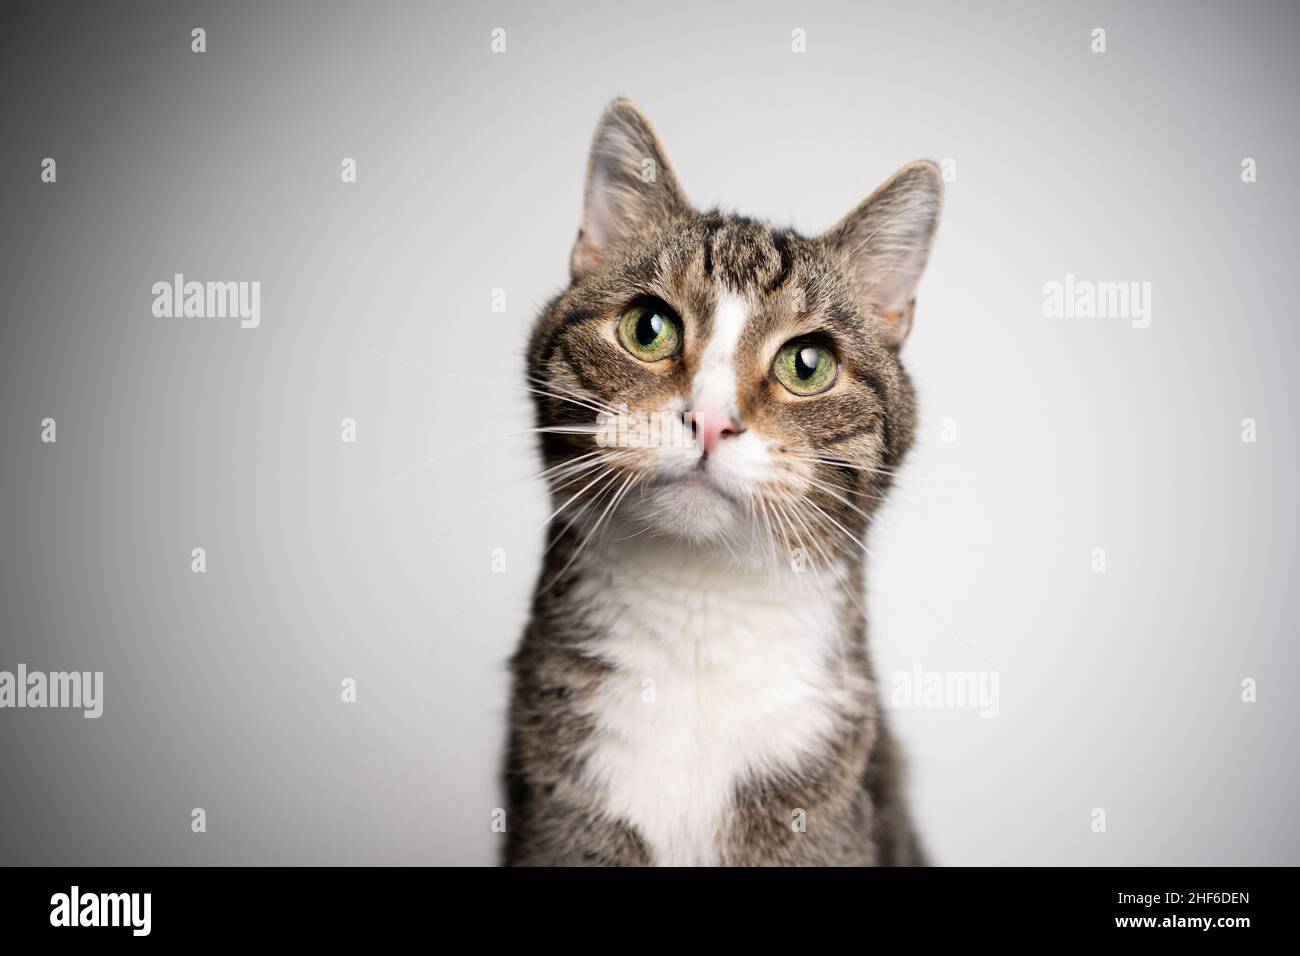 beautiful old tabby white cat with green eyes tilting head portrait on white background with copy space Stock Photo